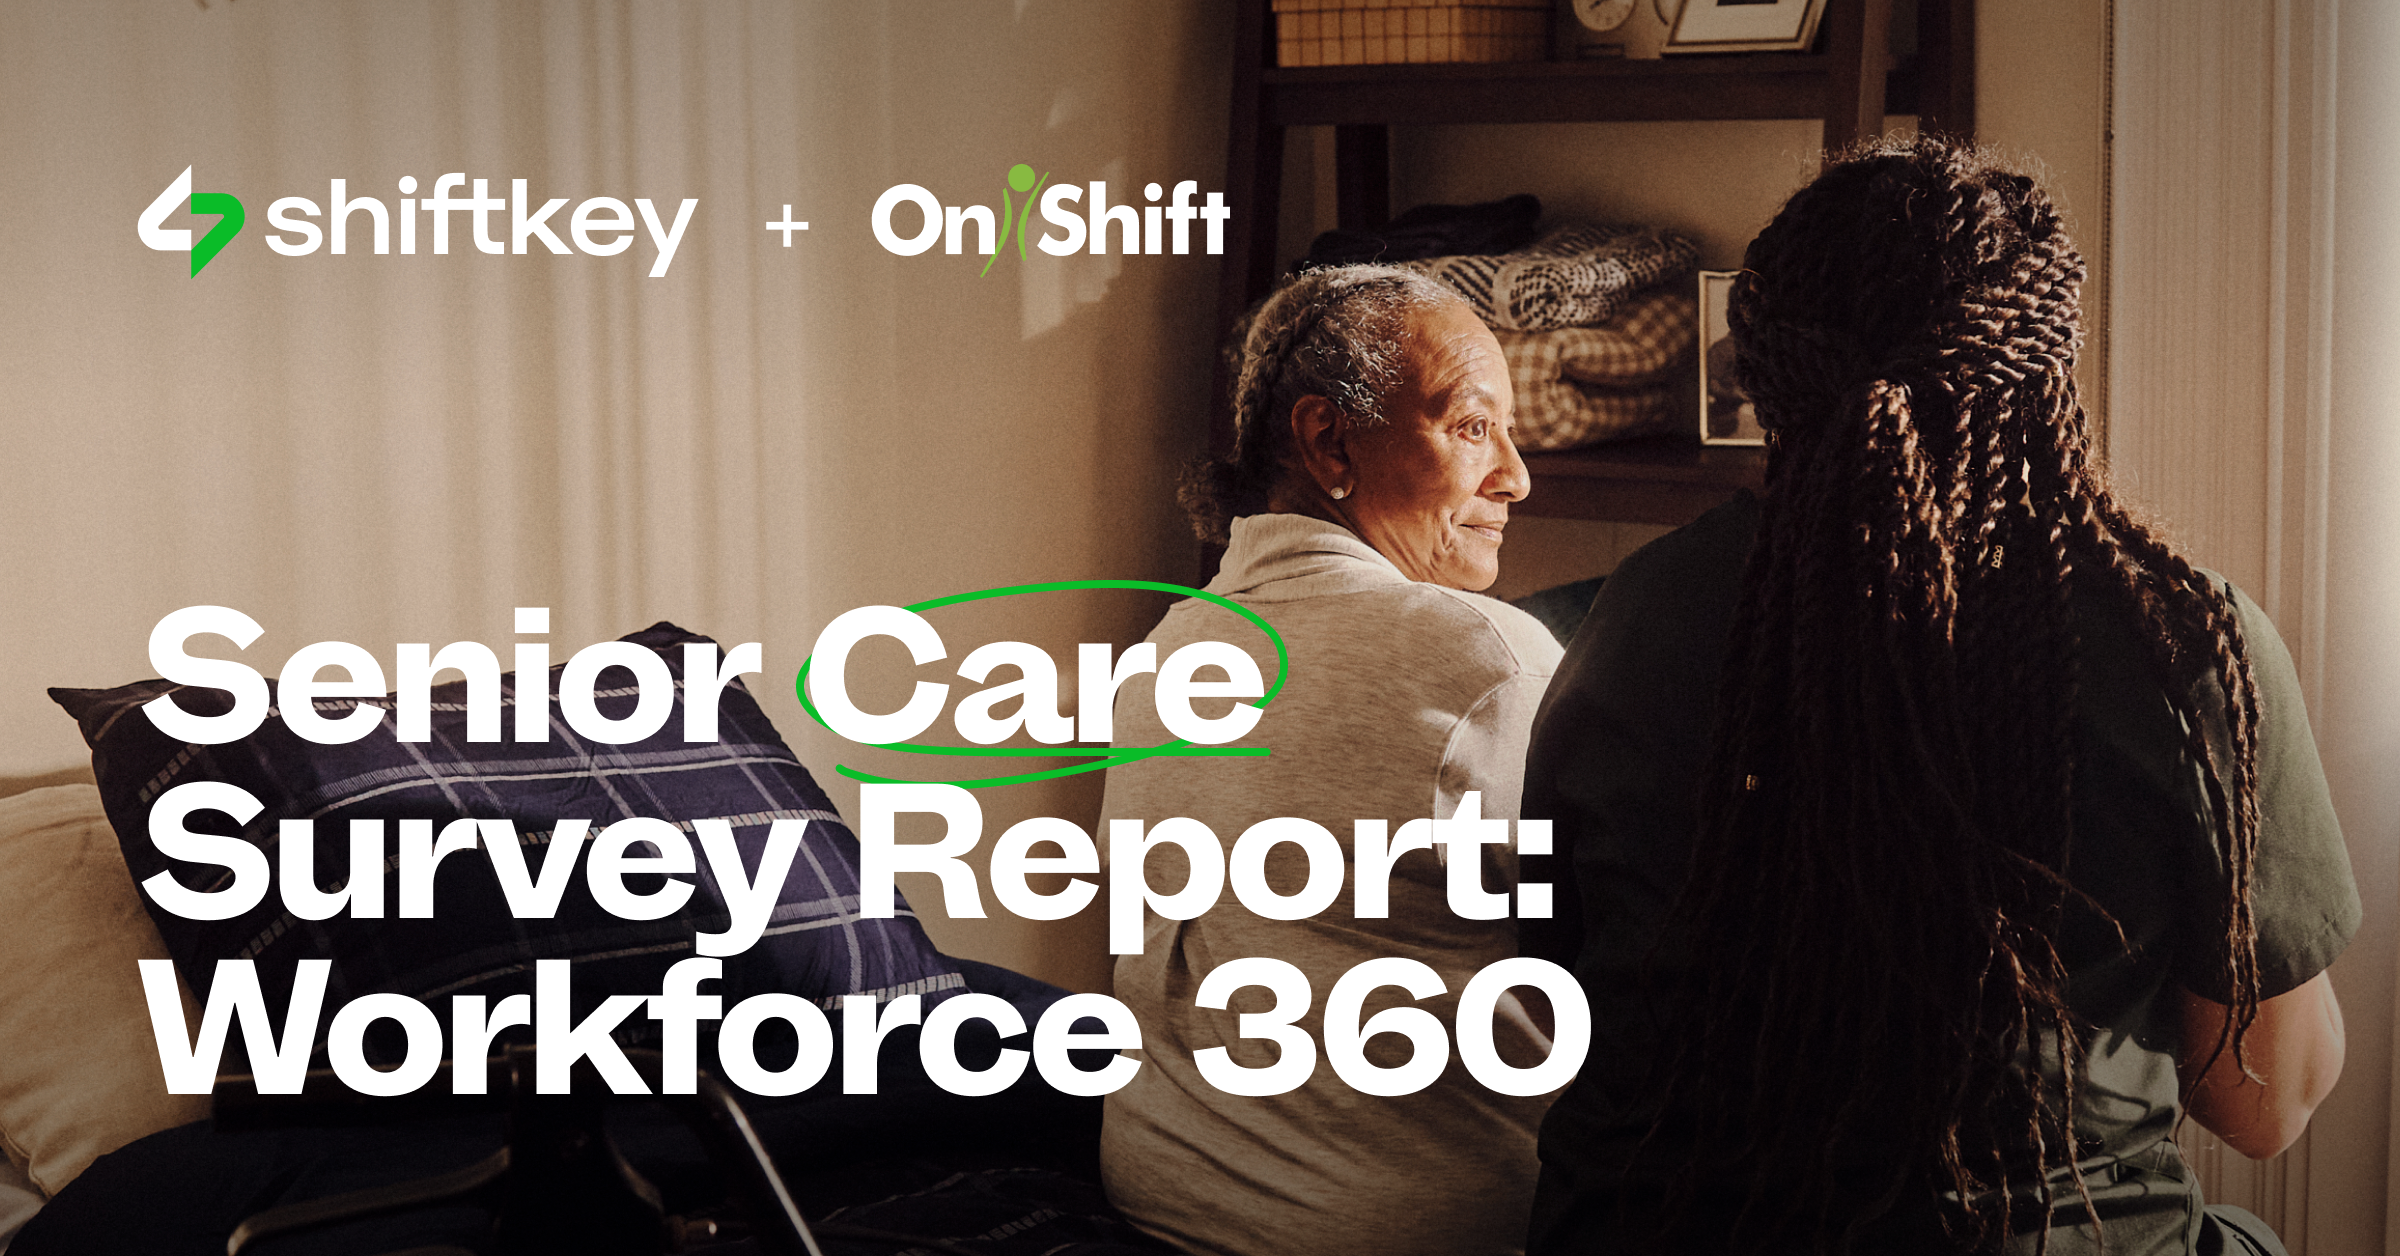 Senior Care Survey: New Insights on the Future of the Senior Care Workforce